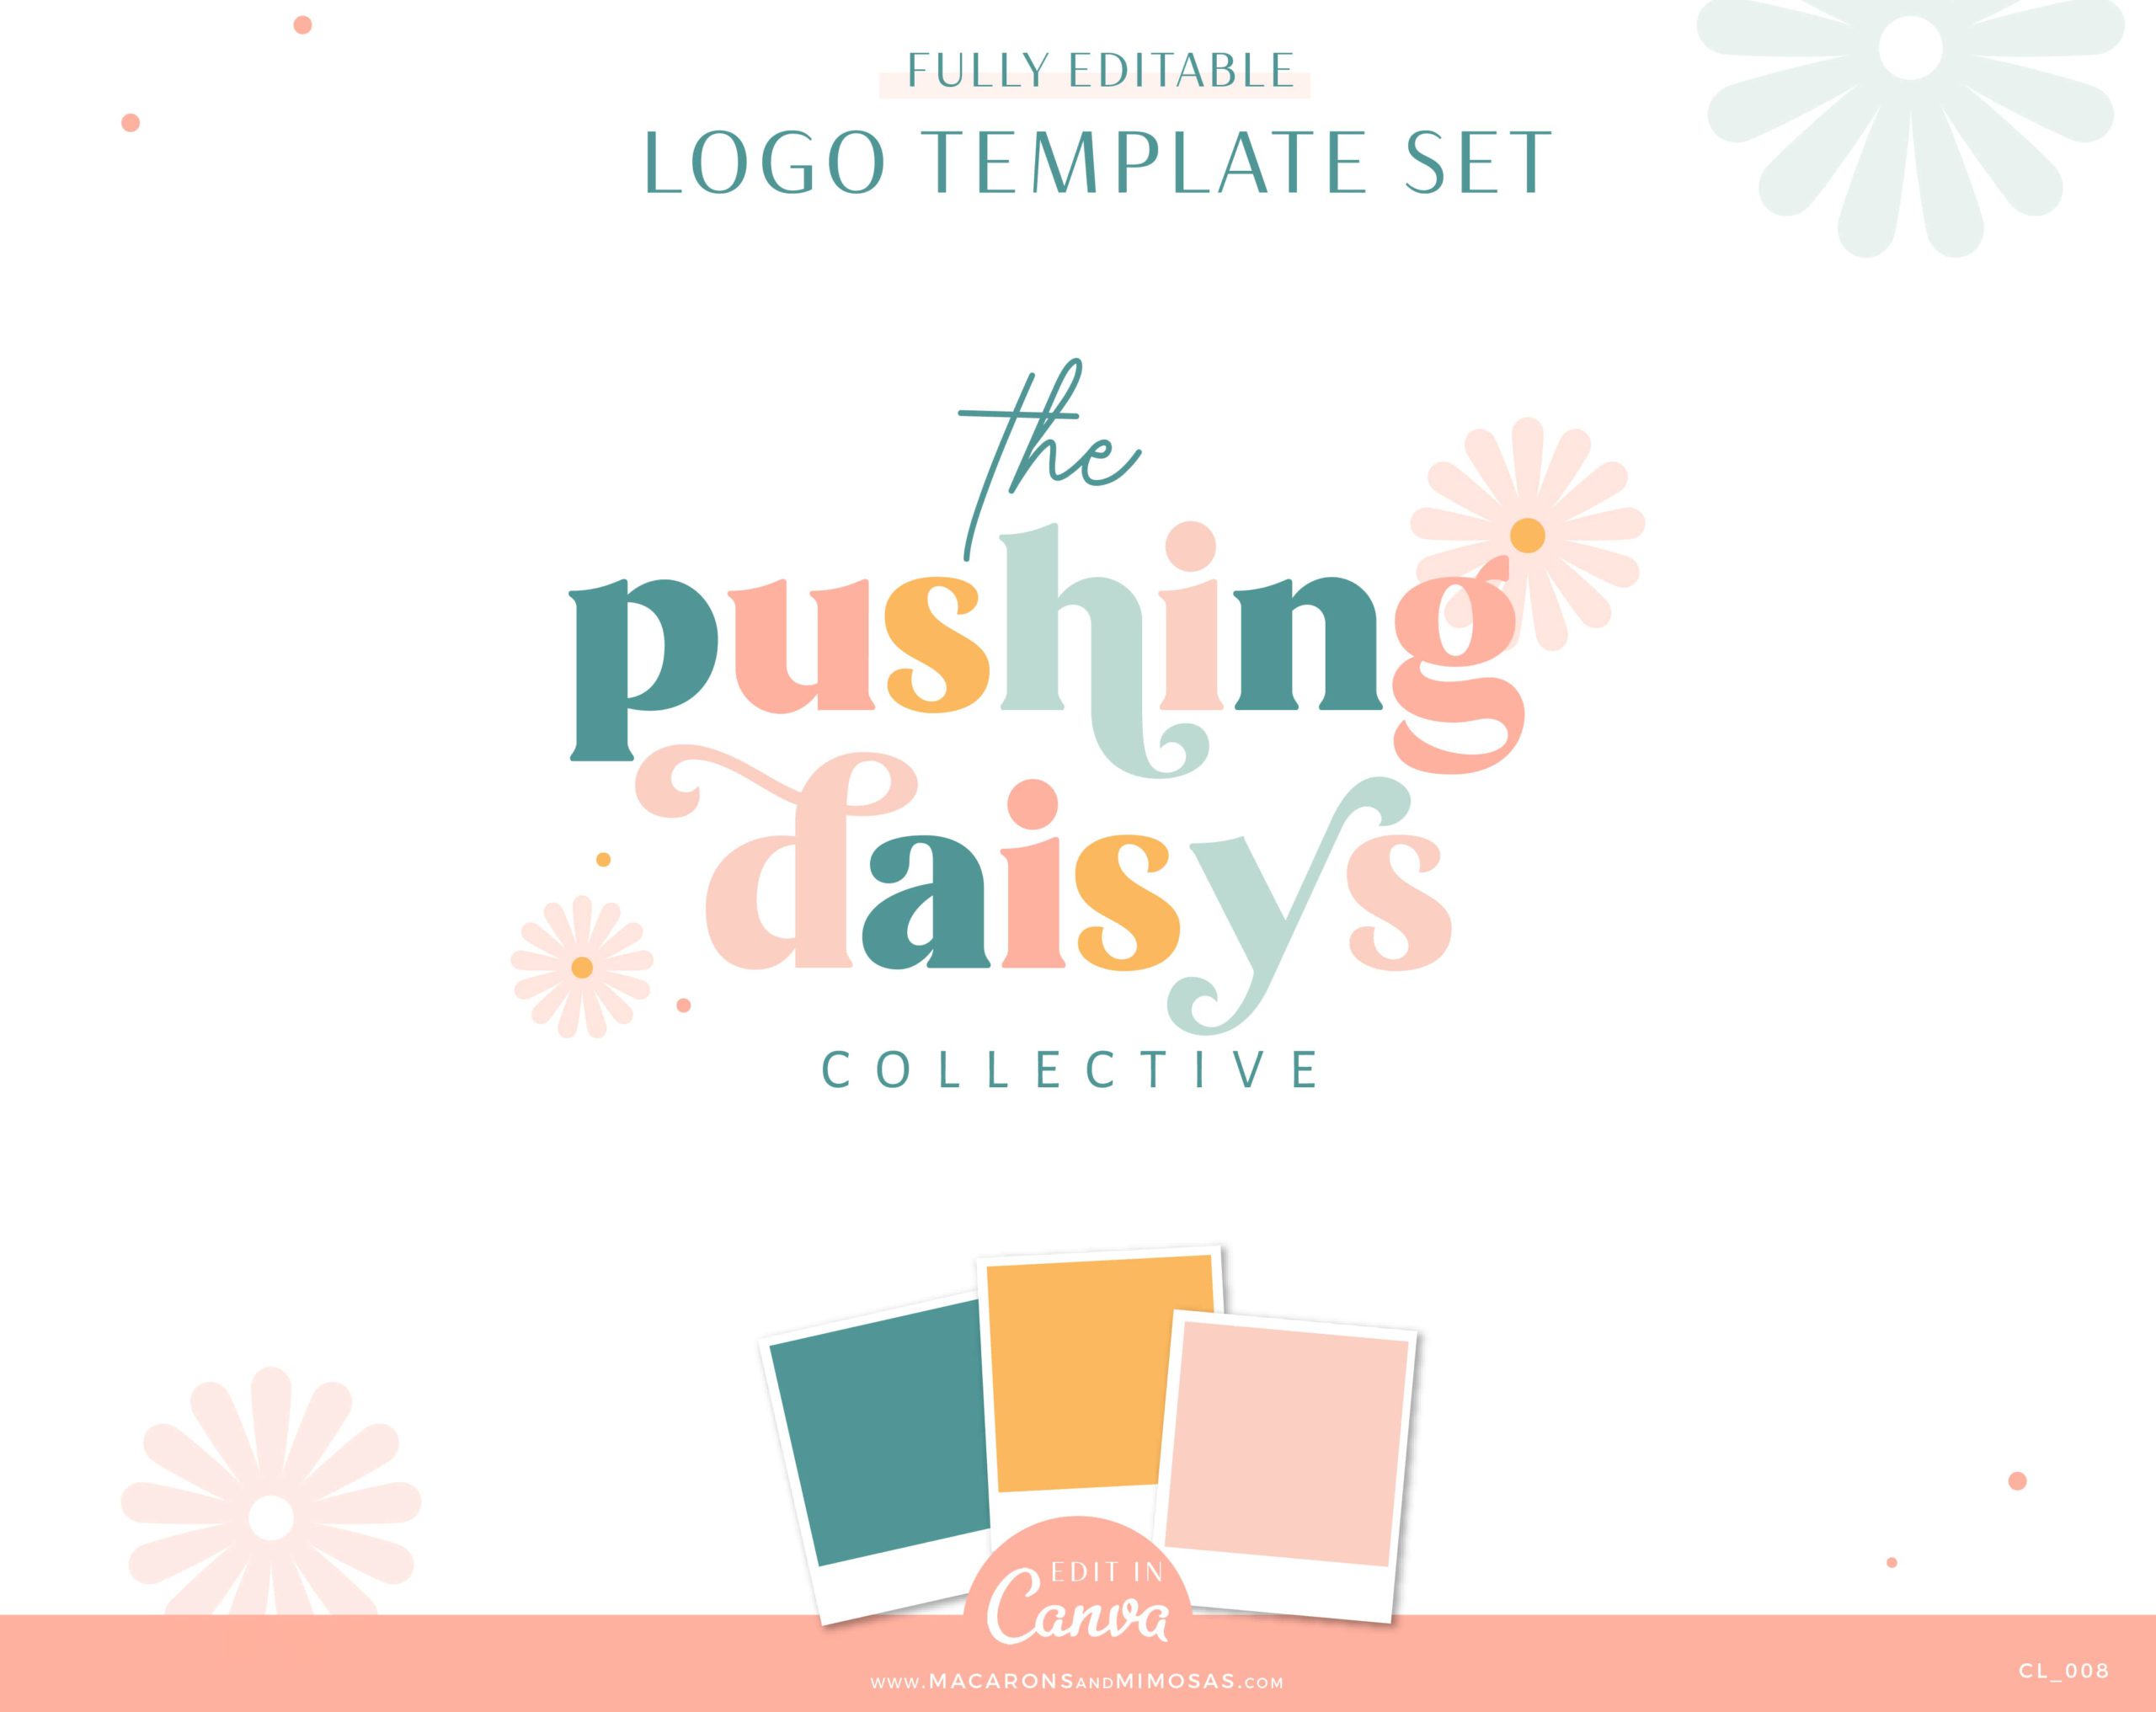 DIY Daisy Logo Design Canva Template with Custom Pink Flower colorful logo Brand Board template, Boho Stock Photos suggestions, and more! 